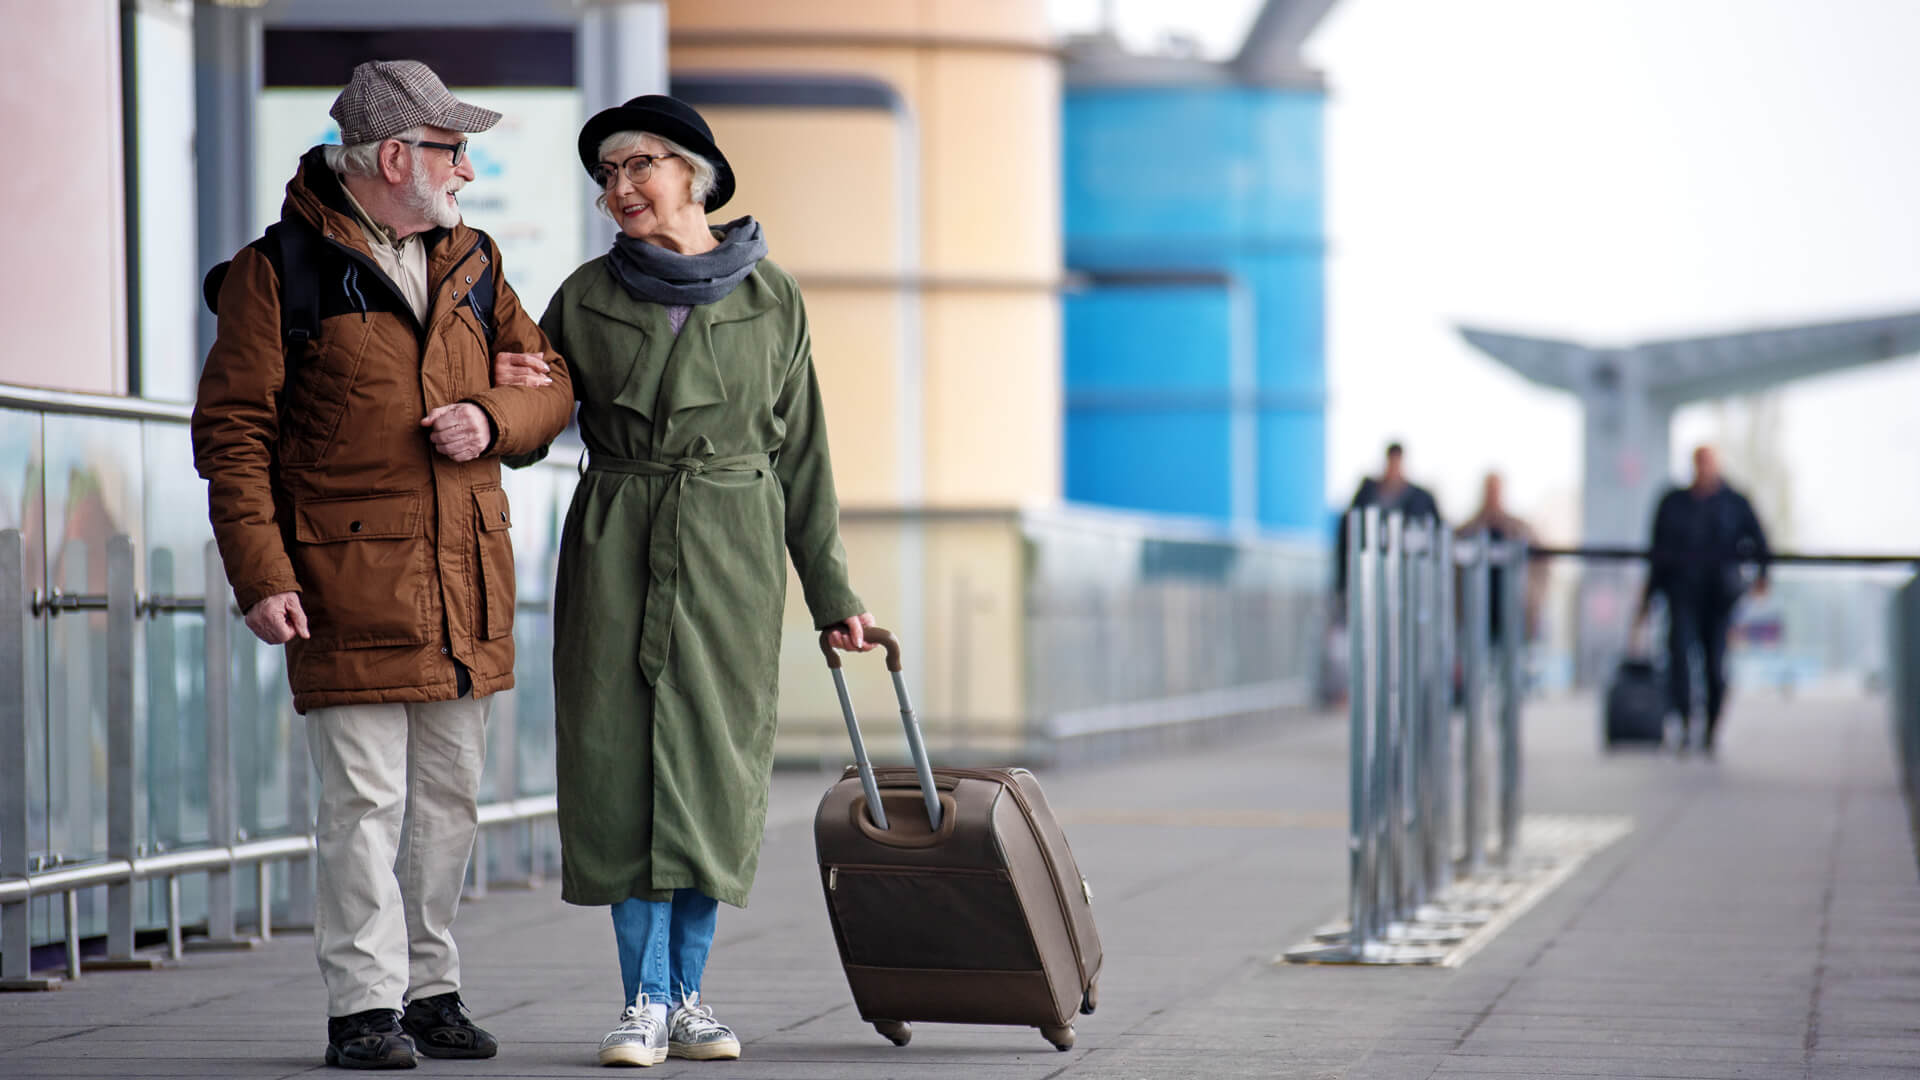 3 Airlines That Are The Most Affordable for Boomers